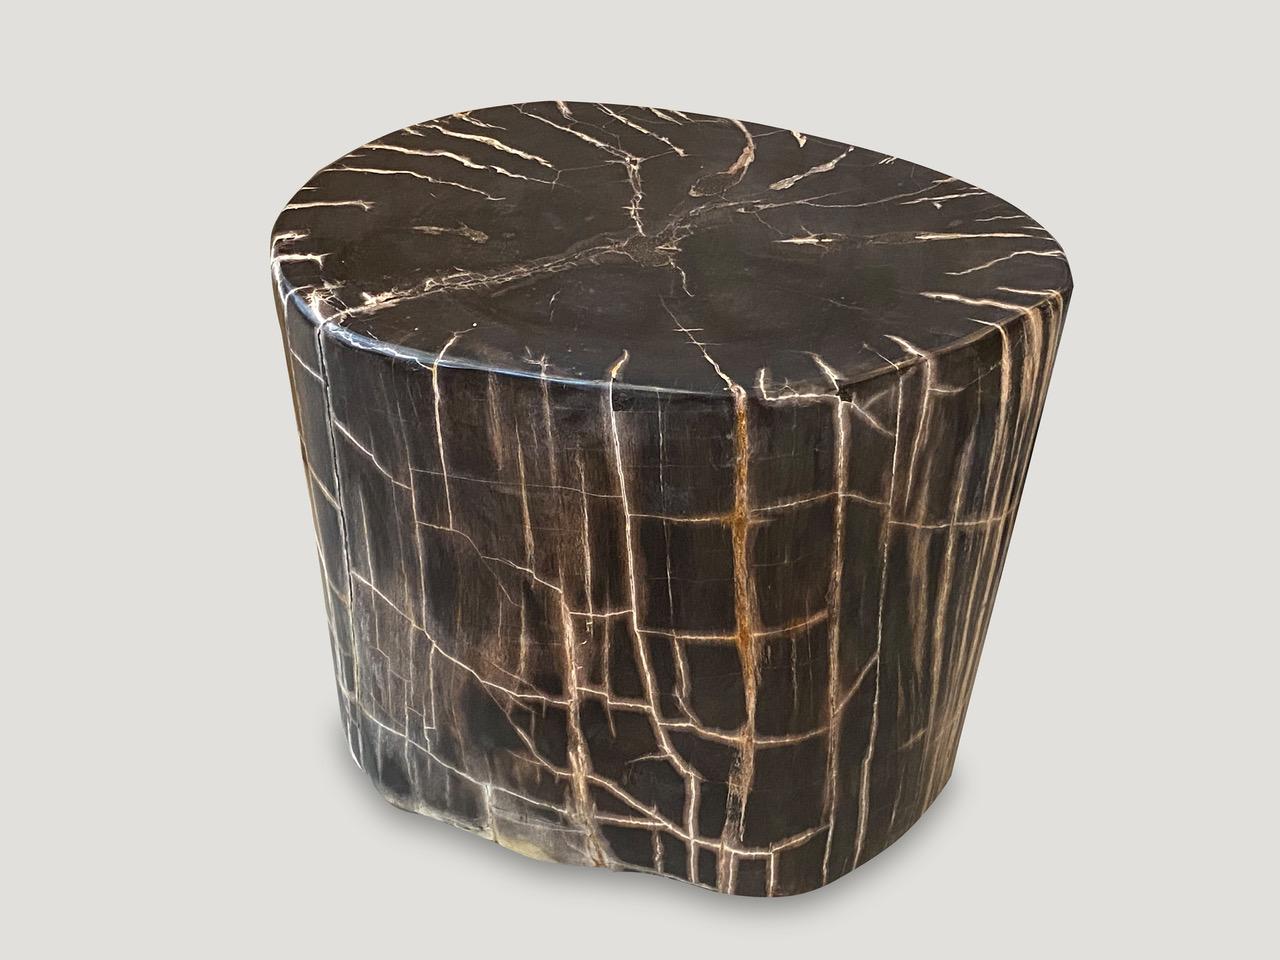 High quality petrified wood side table. It’s fascinating how Mother Nature produces these exquisite 40 million year old petrified teak logs with such contrasting colors and natural patterns throughout. Modern yet with so much history. This one is